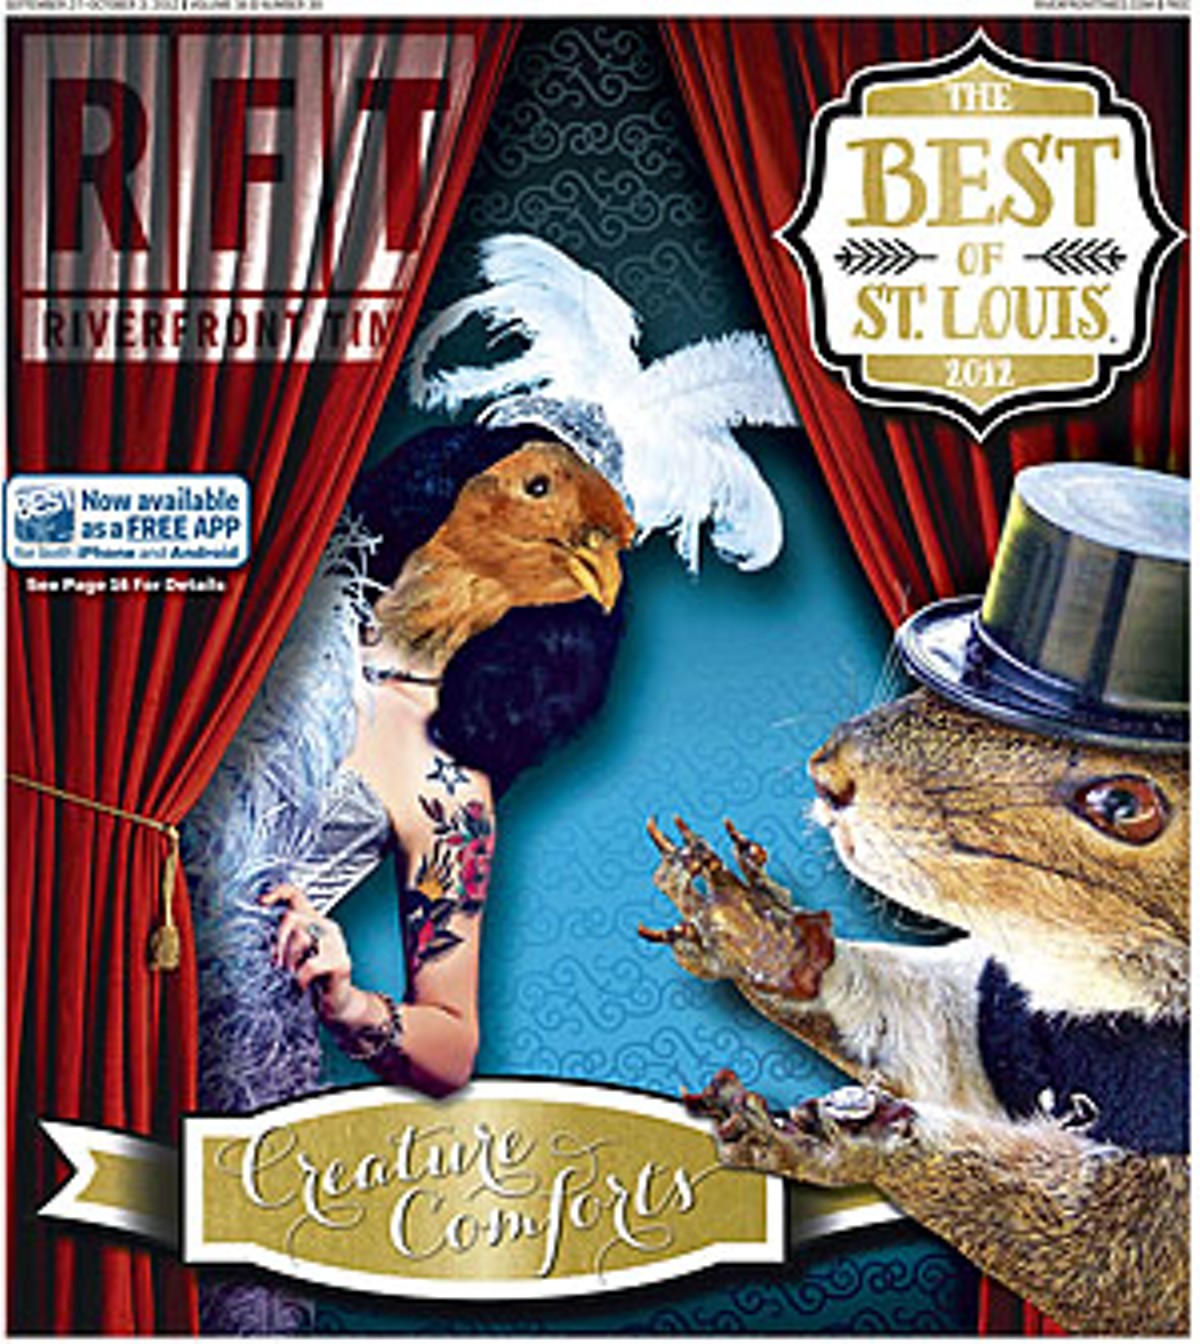 Best of St. Louis 2012 Issue Cover